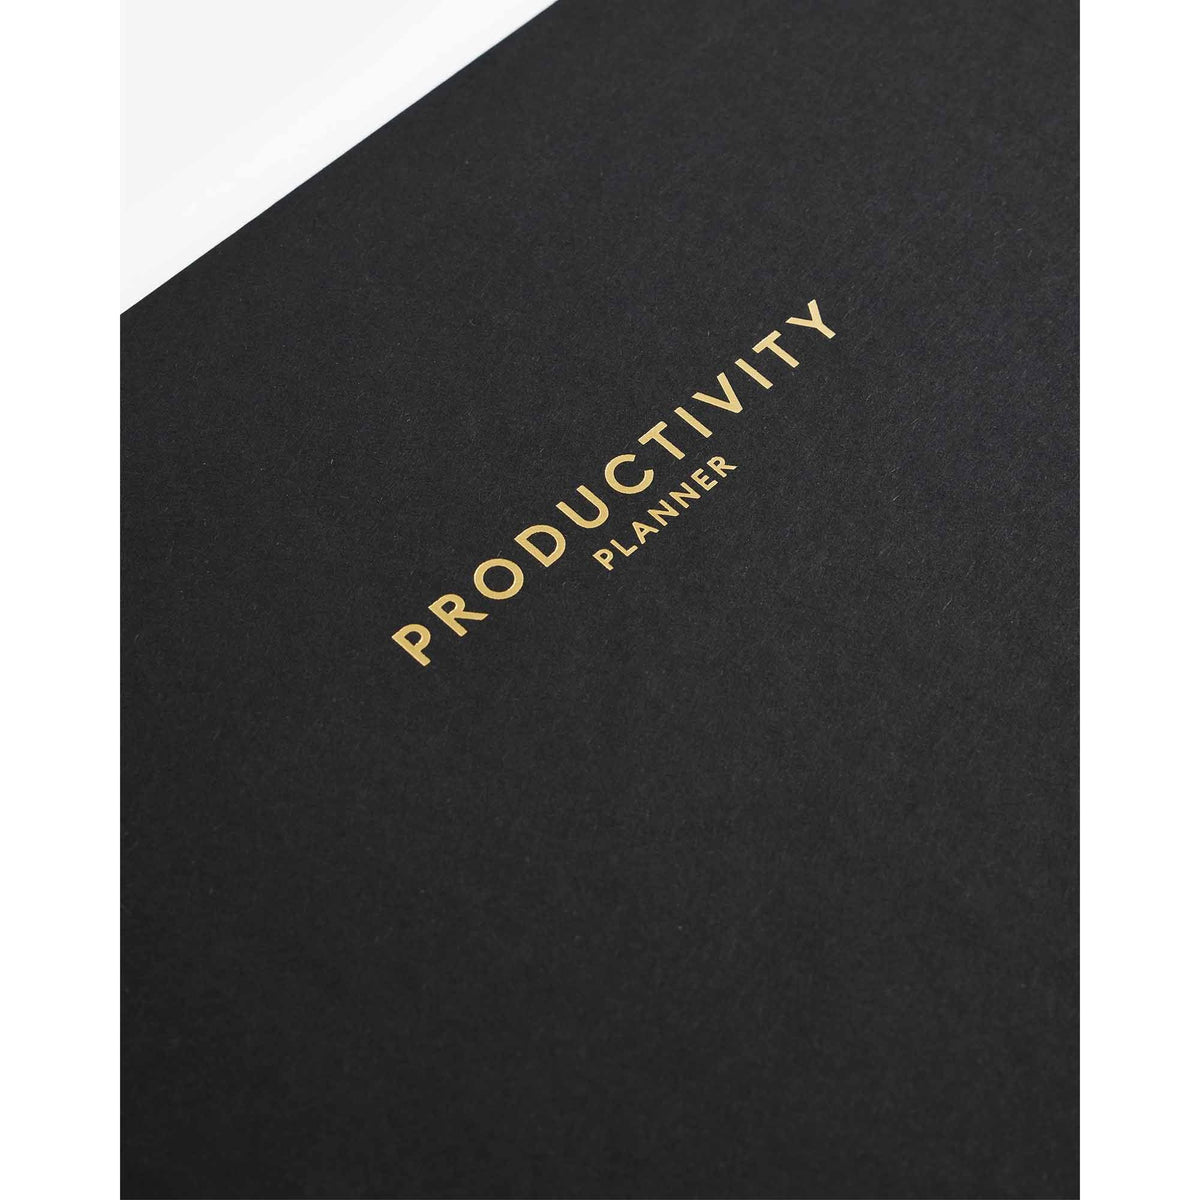 Productivity Weekly Desk Pad by Intelligent Change